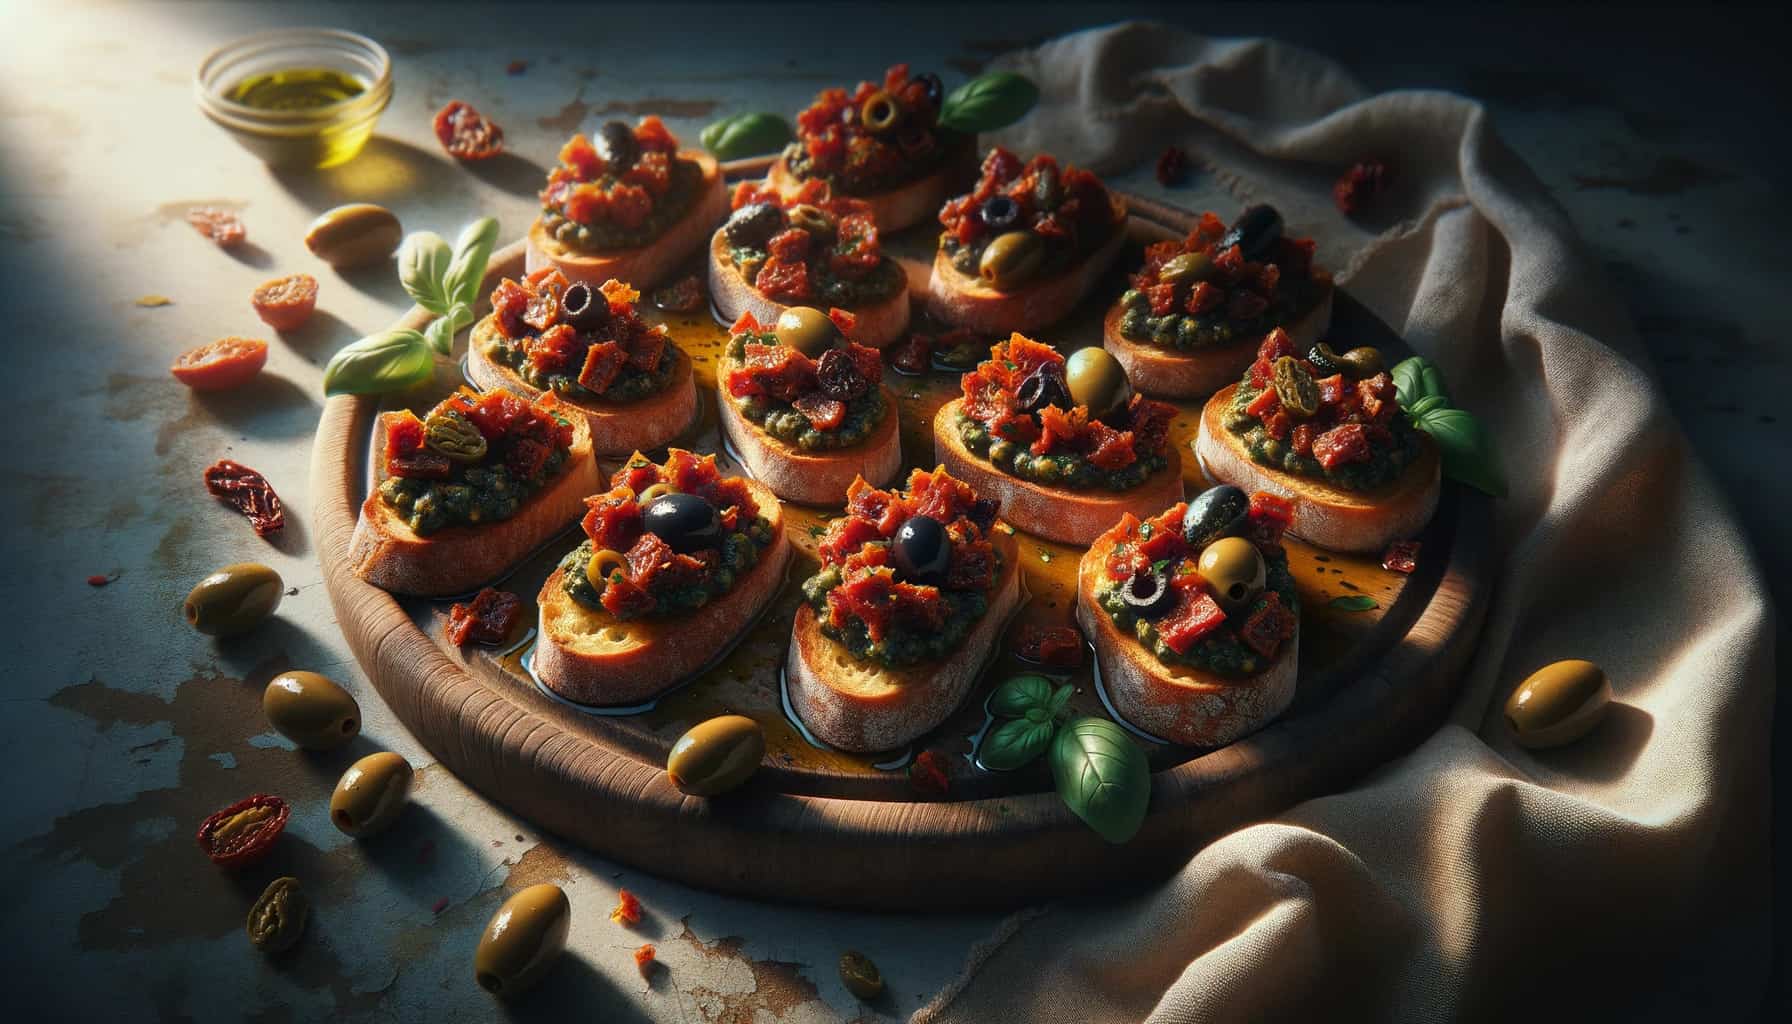 Olive and tomato tapenade crostini. A wooden serving board showcases an array of crispy crostini, each topped with a generous tapenade made from chopped olives, sun-dried tomatoes, capers, and garlic.